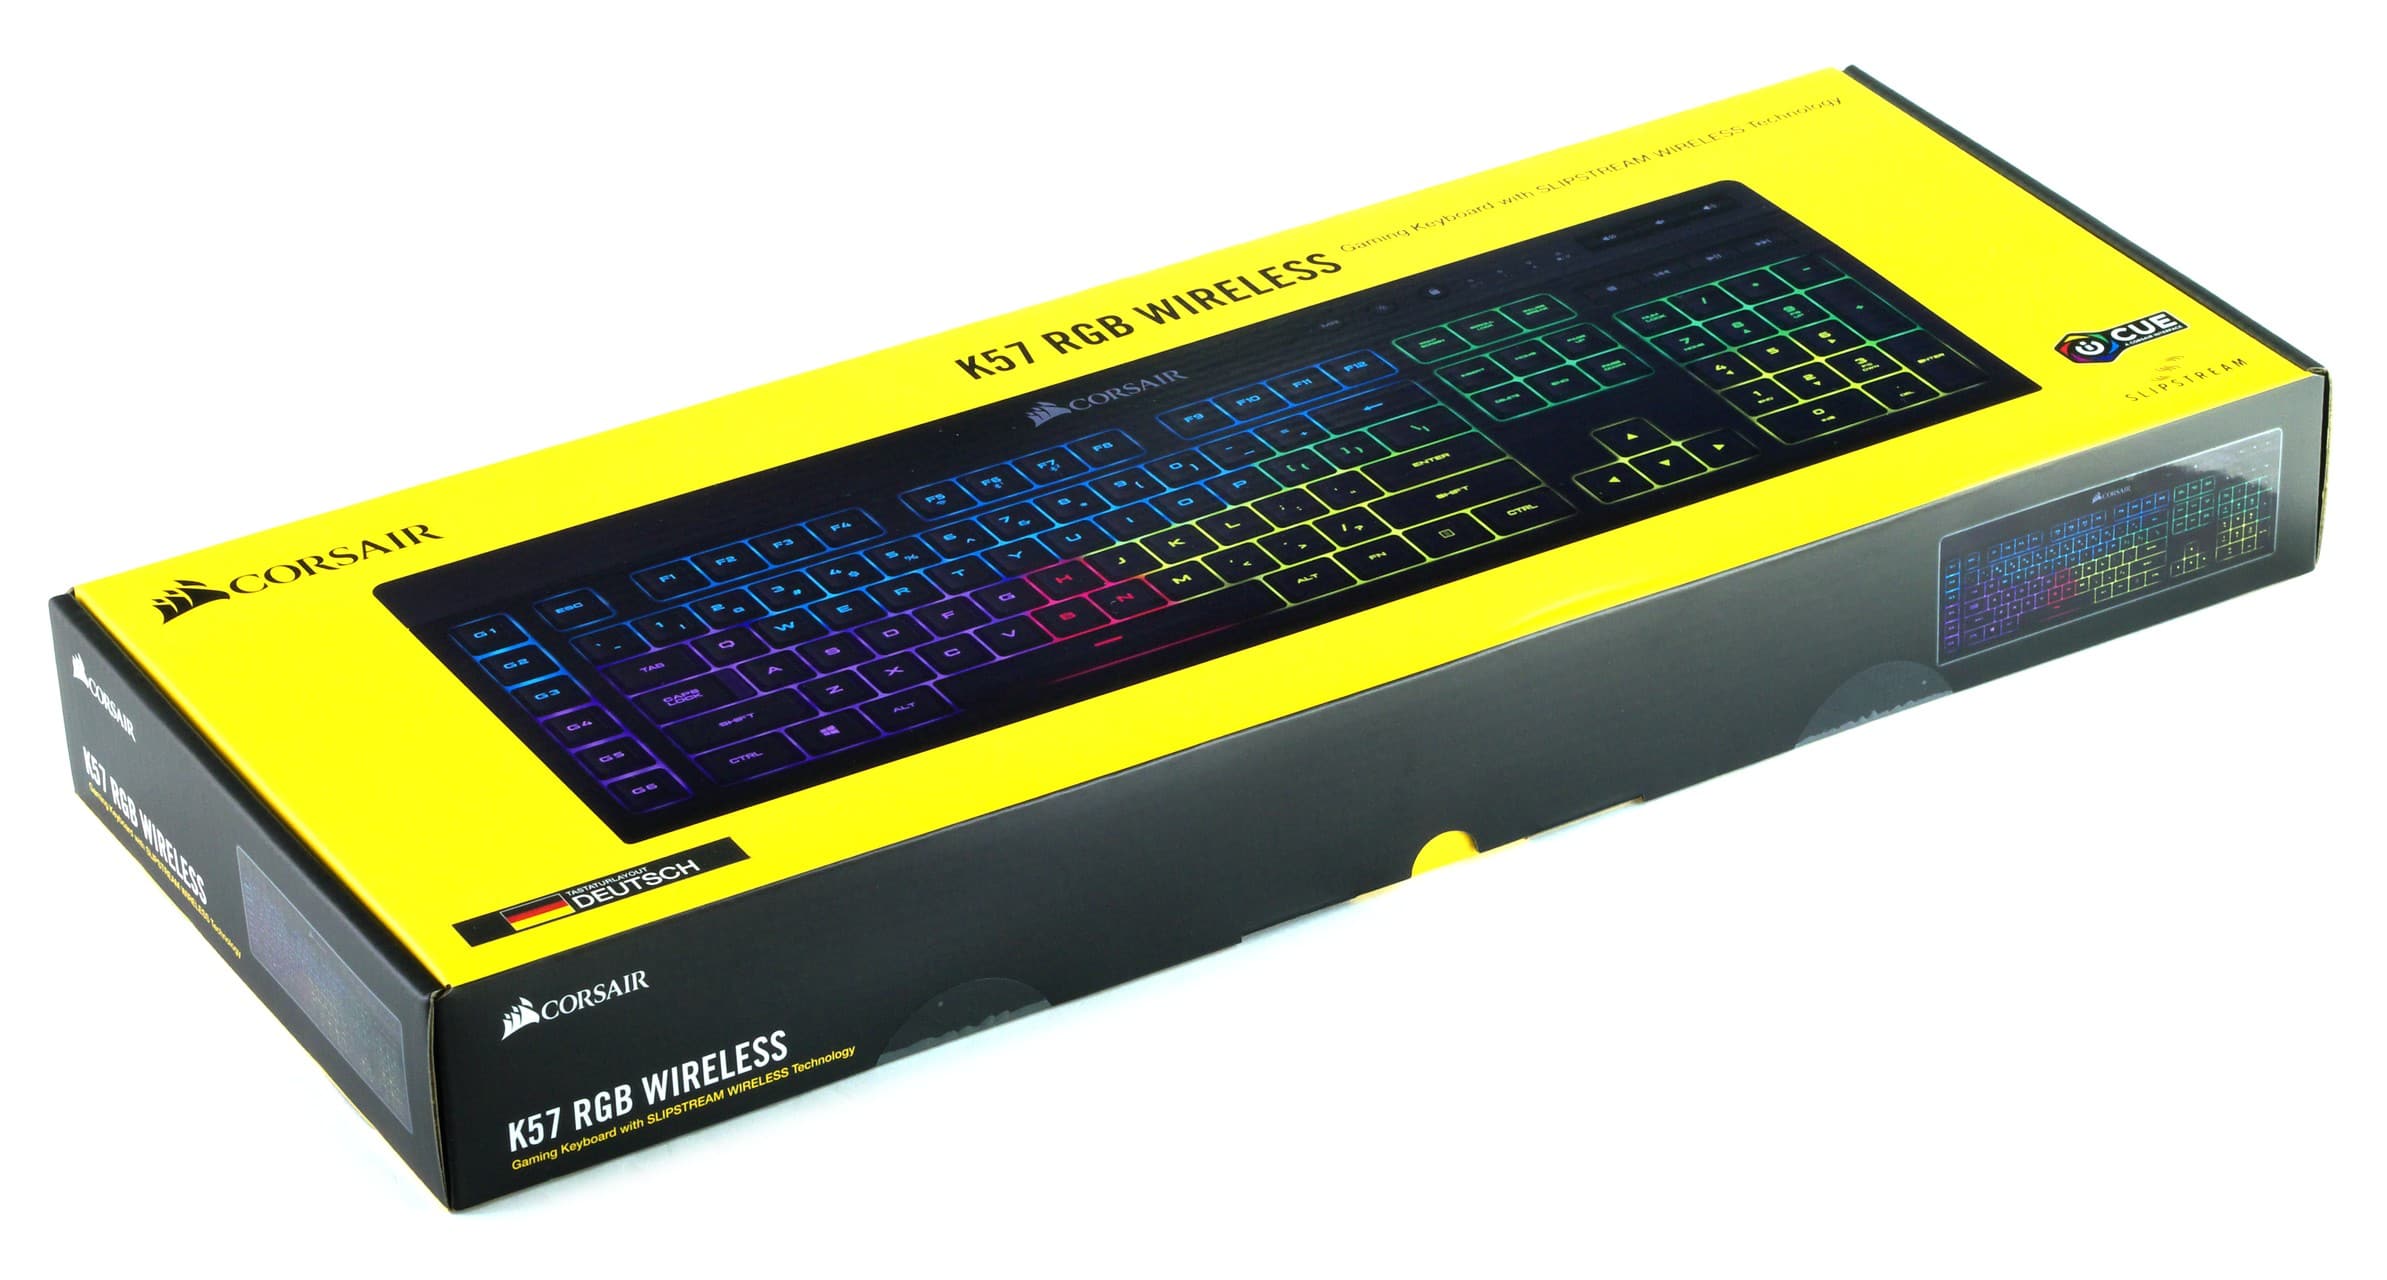 Corsair K57 RGB Wireless Review: Wireless Keyboard with Rubberdomes